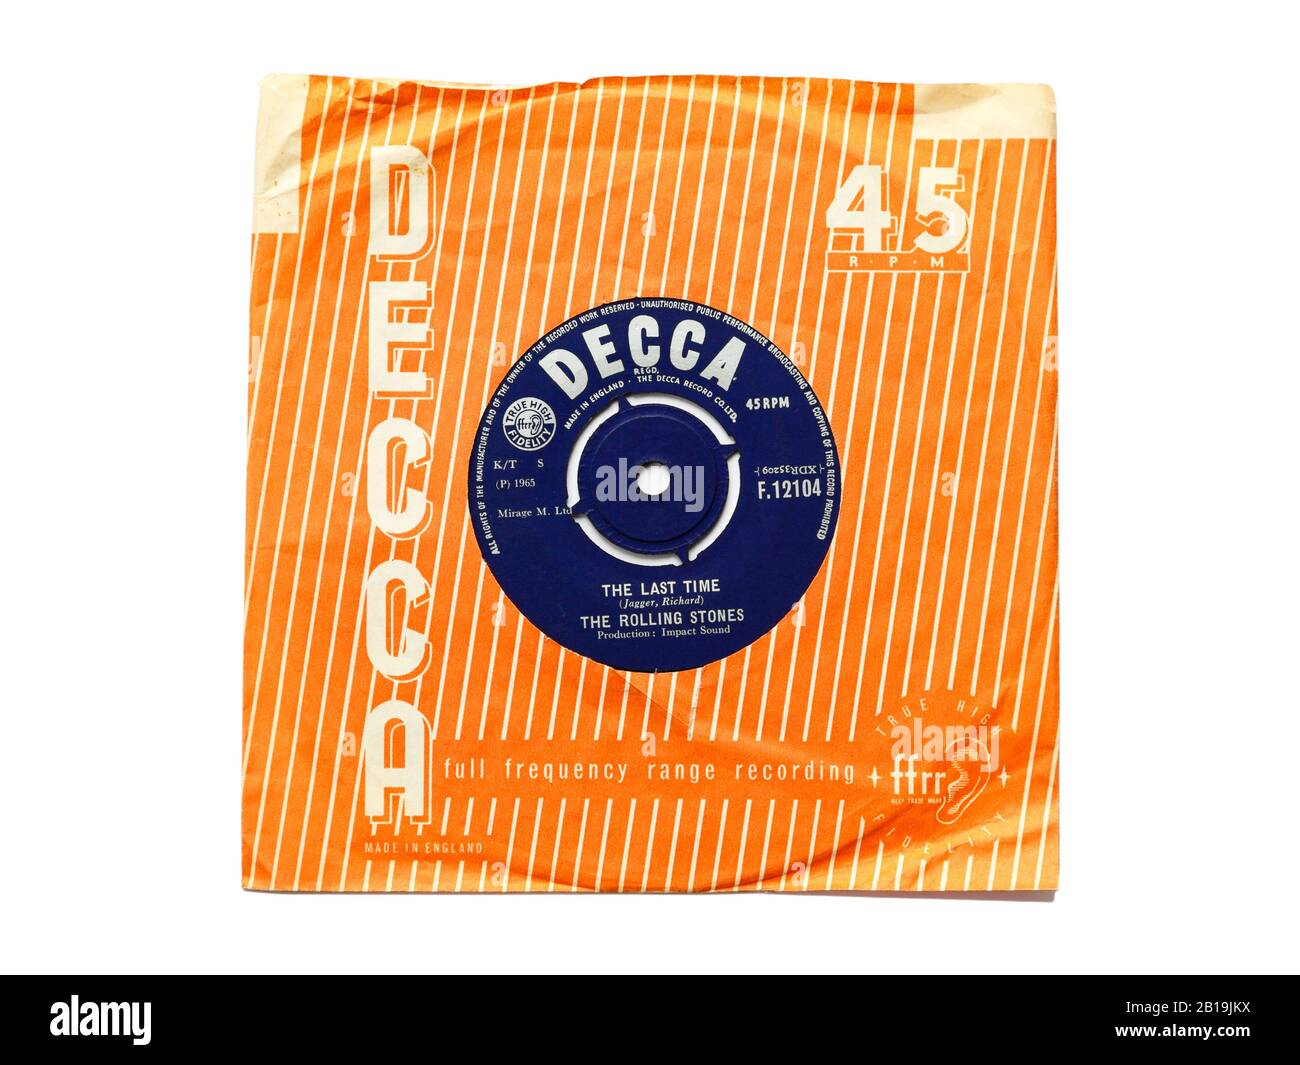 Old original Decca label vinyl 45 RPM record The Last Time by The Rolling Stones 1965 in torn paper sleeve isolated on white. Stock Photo